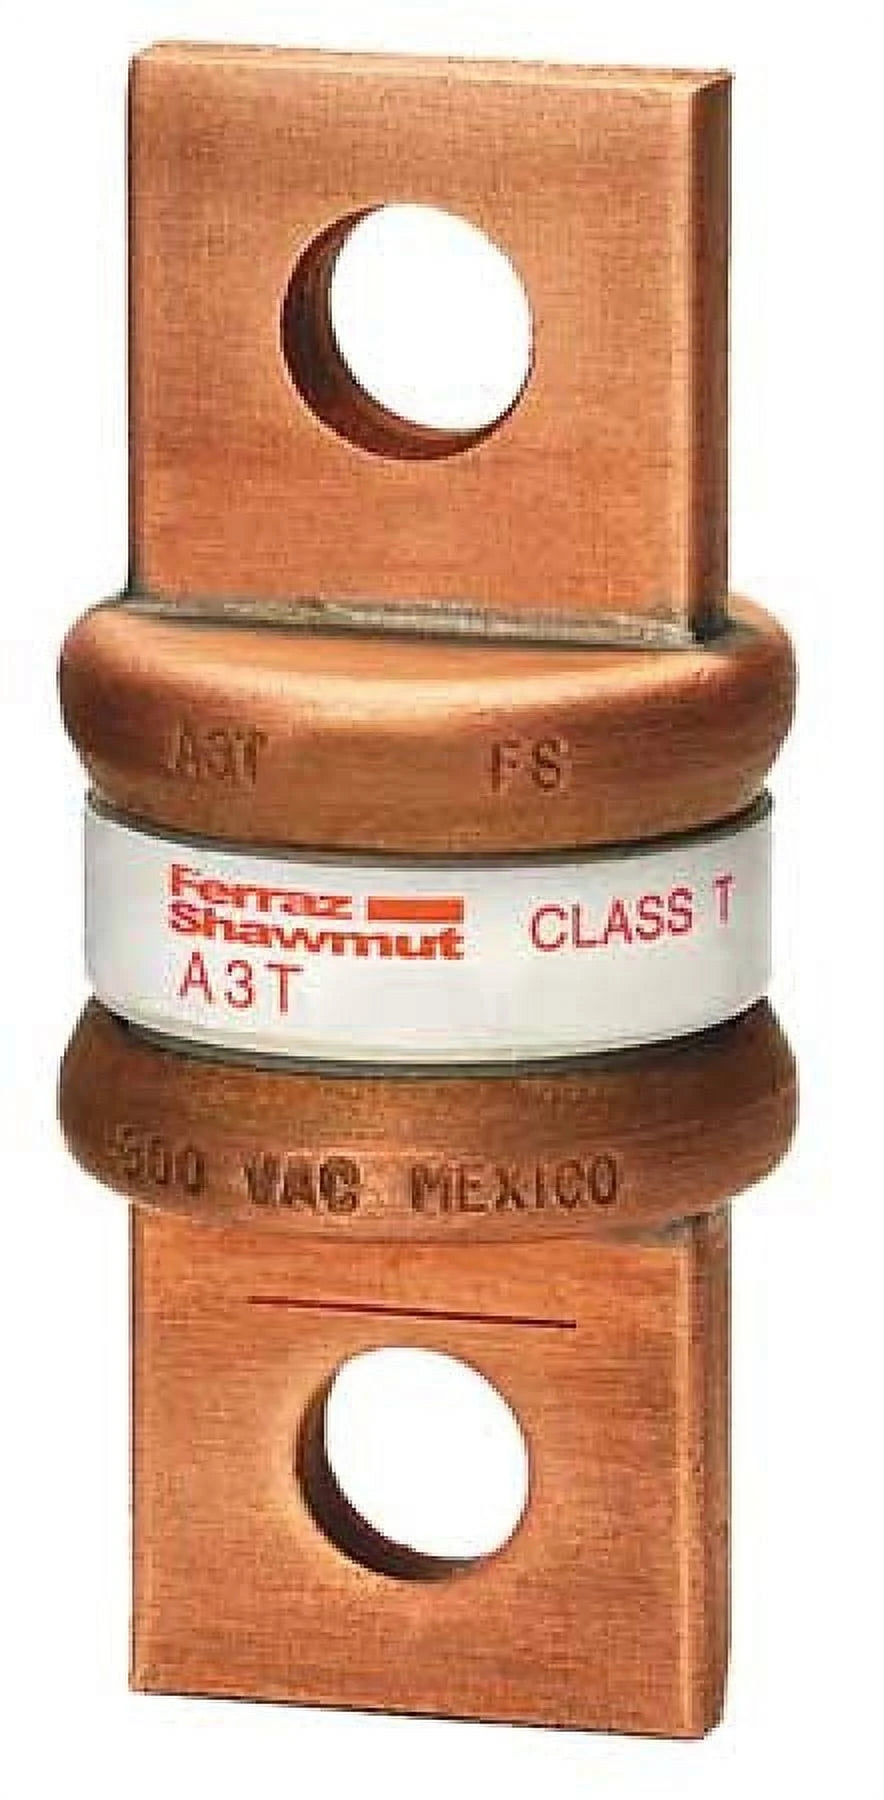 Fuse Amp-Trap® 300V 15A Fast-Acting Class T A3T Series